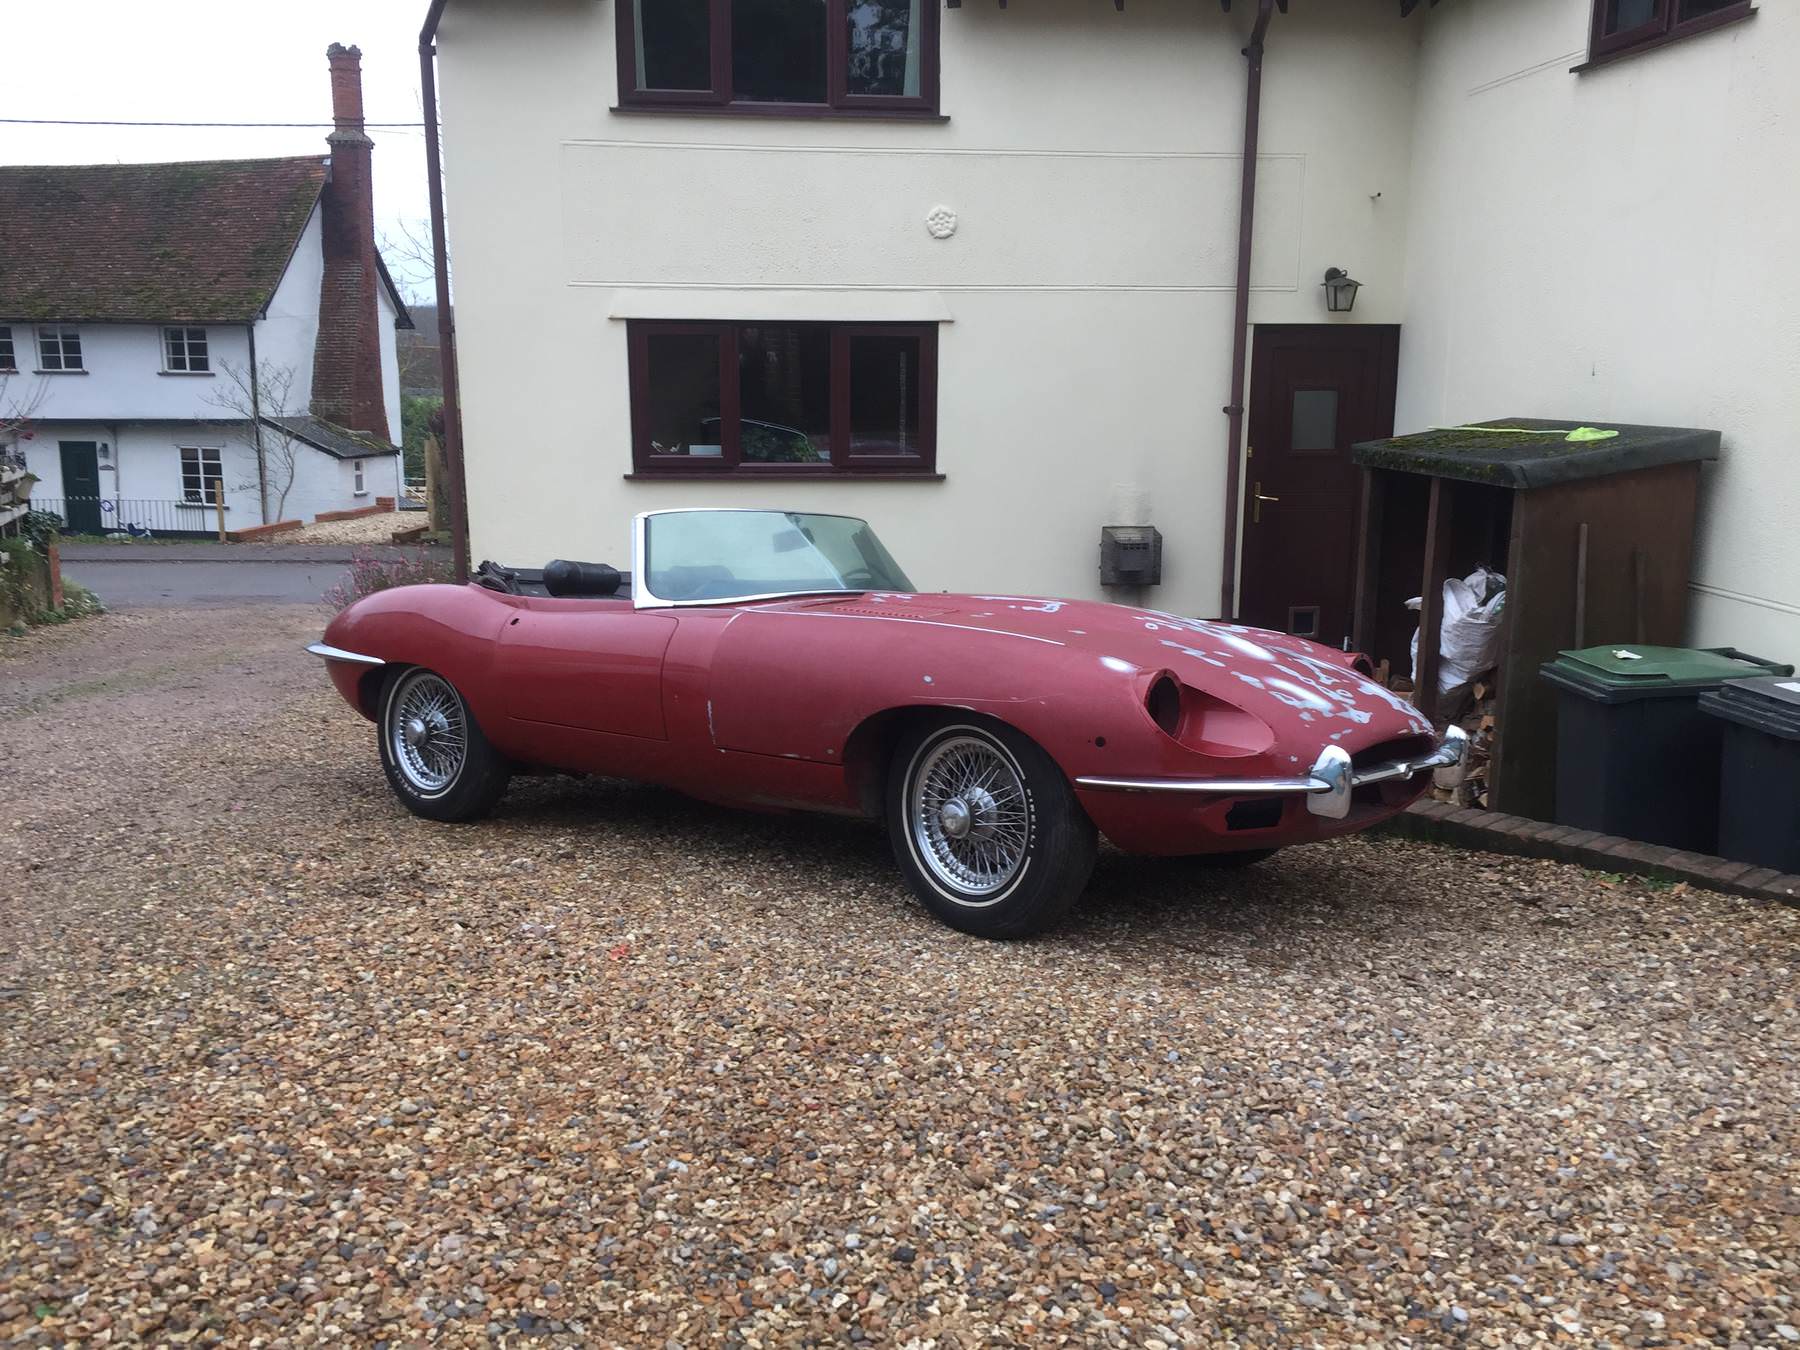 The world's fastest Jaguar E-Type is currently up for sale